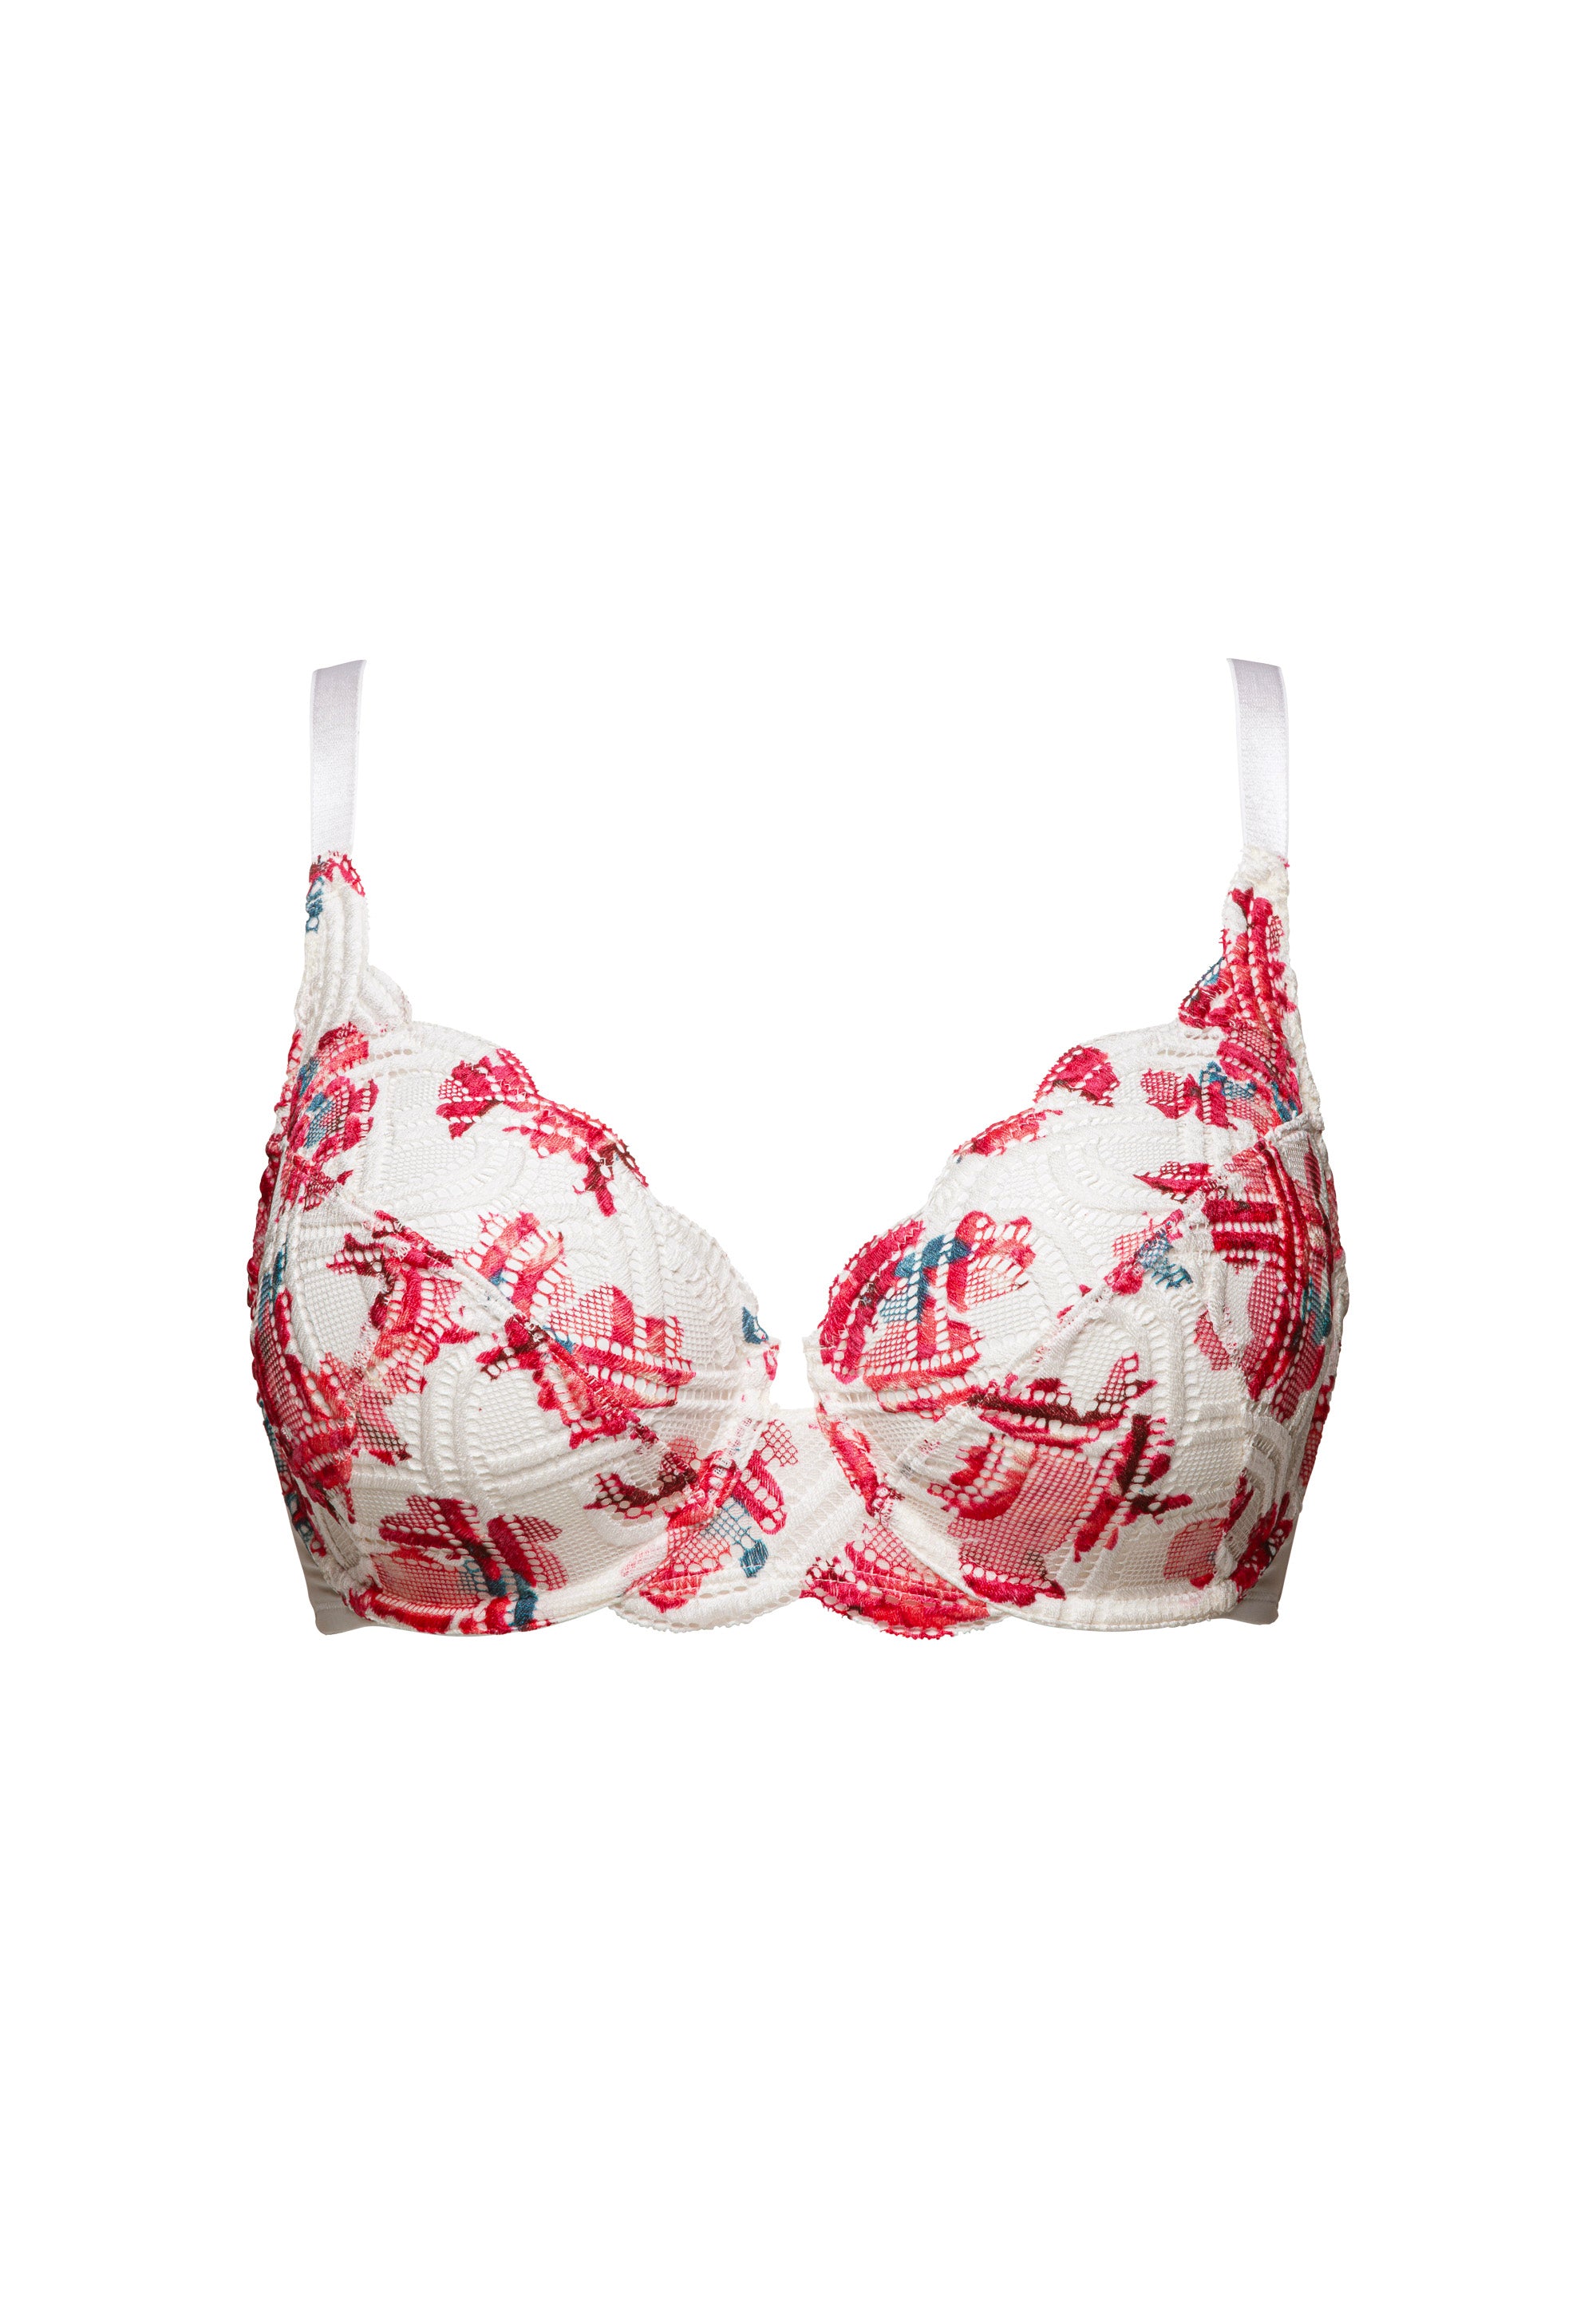 Full cup bra Elise Fantaisy Print Flowers Pink Ivory